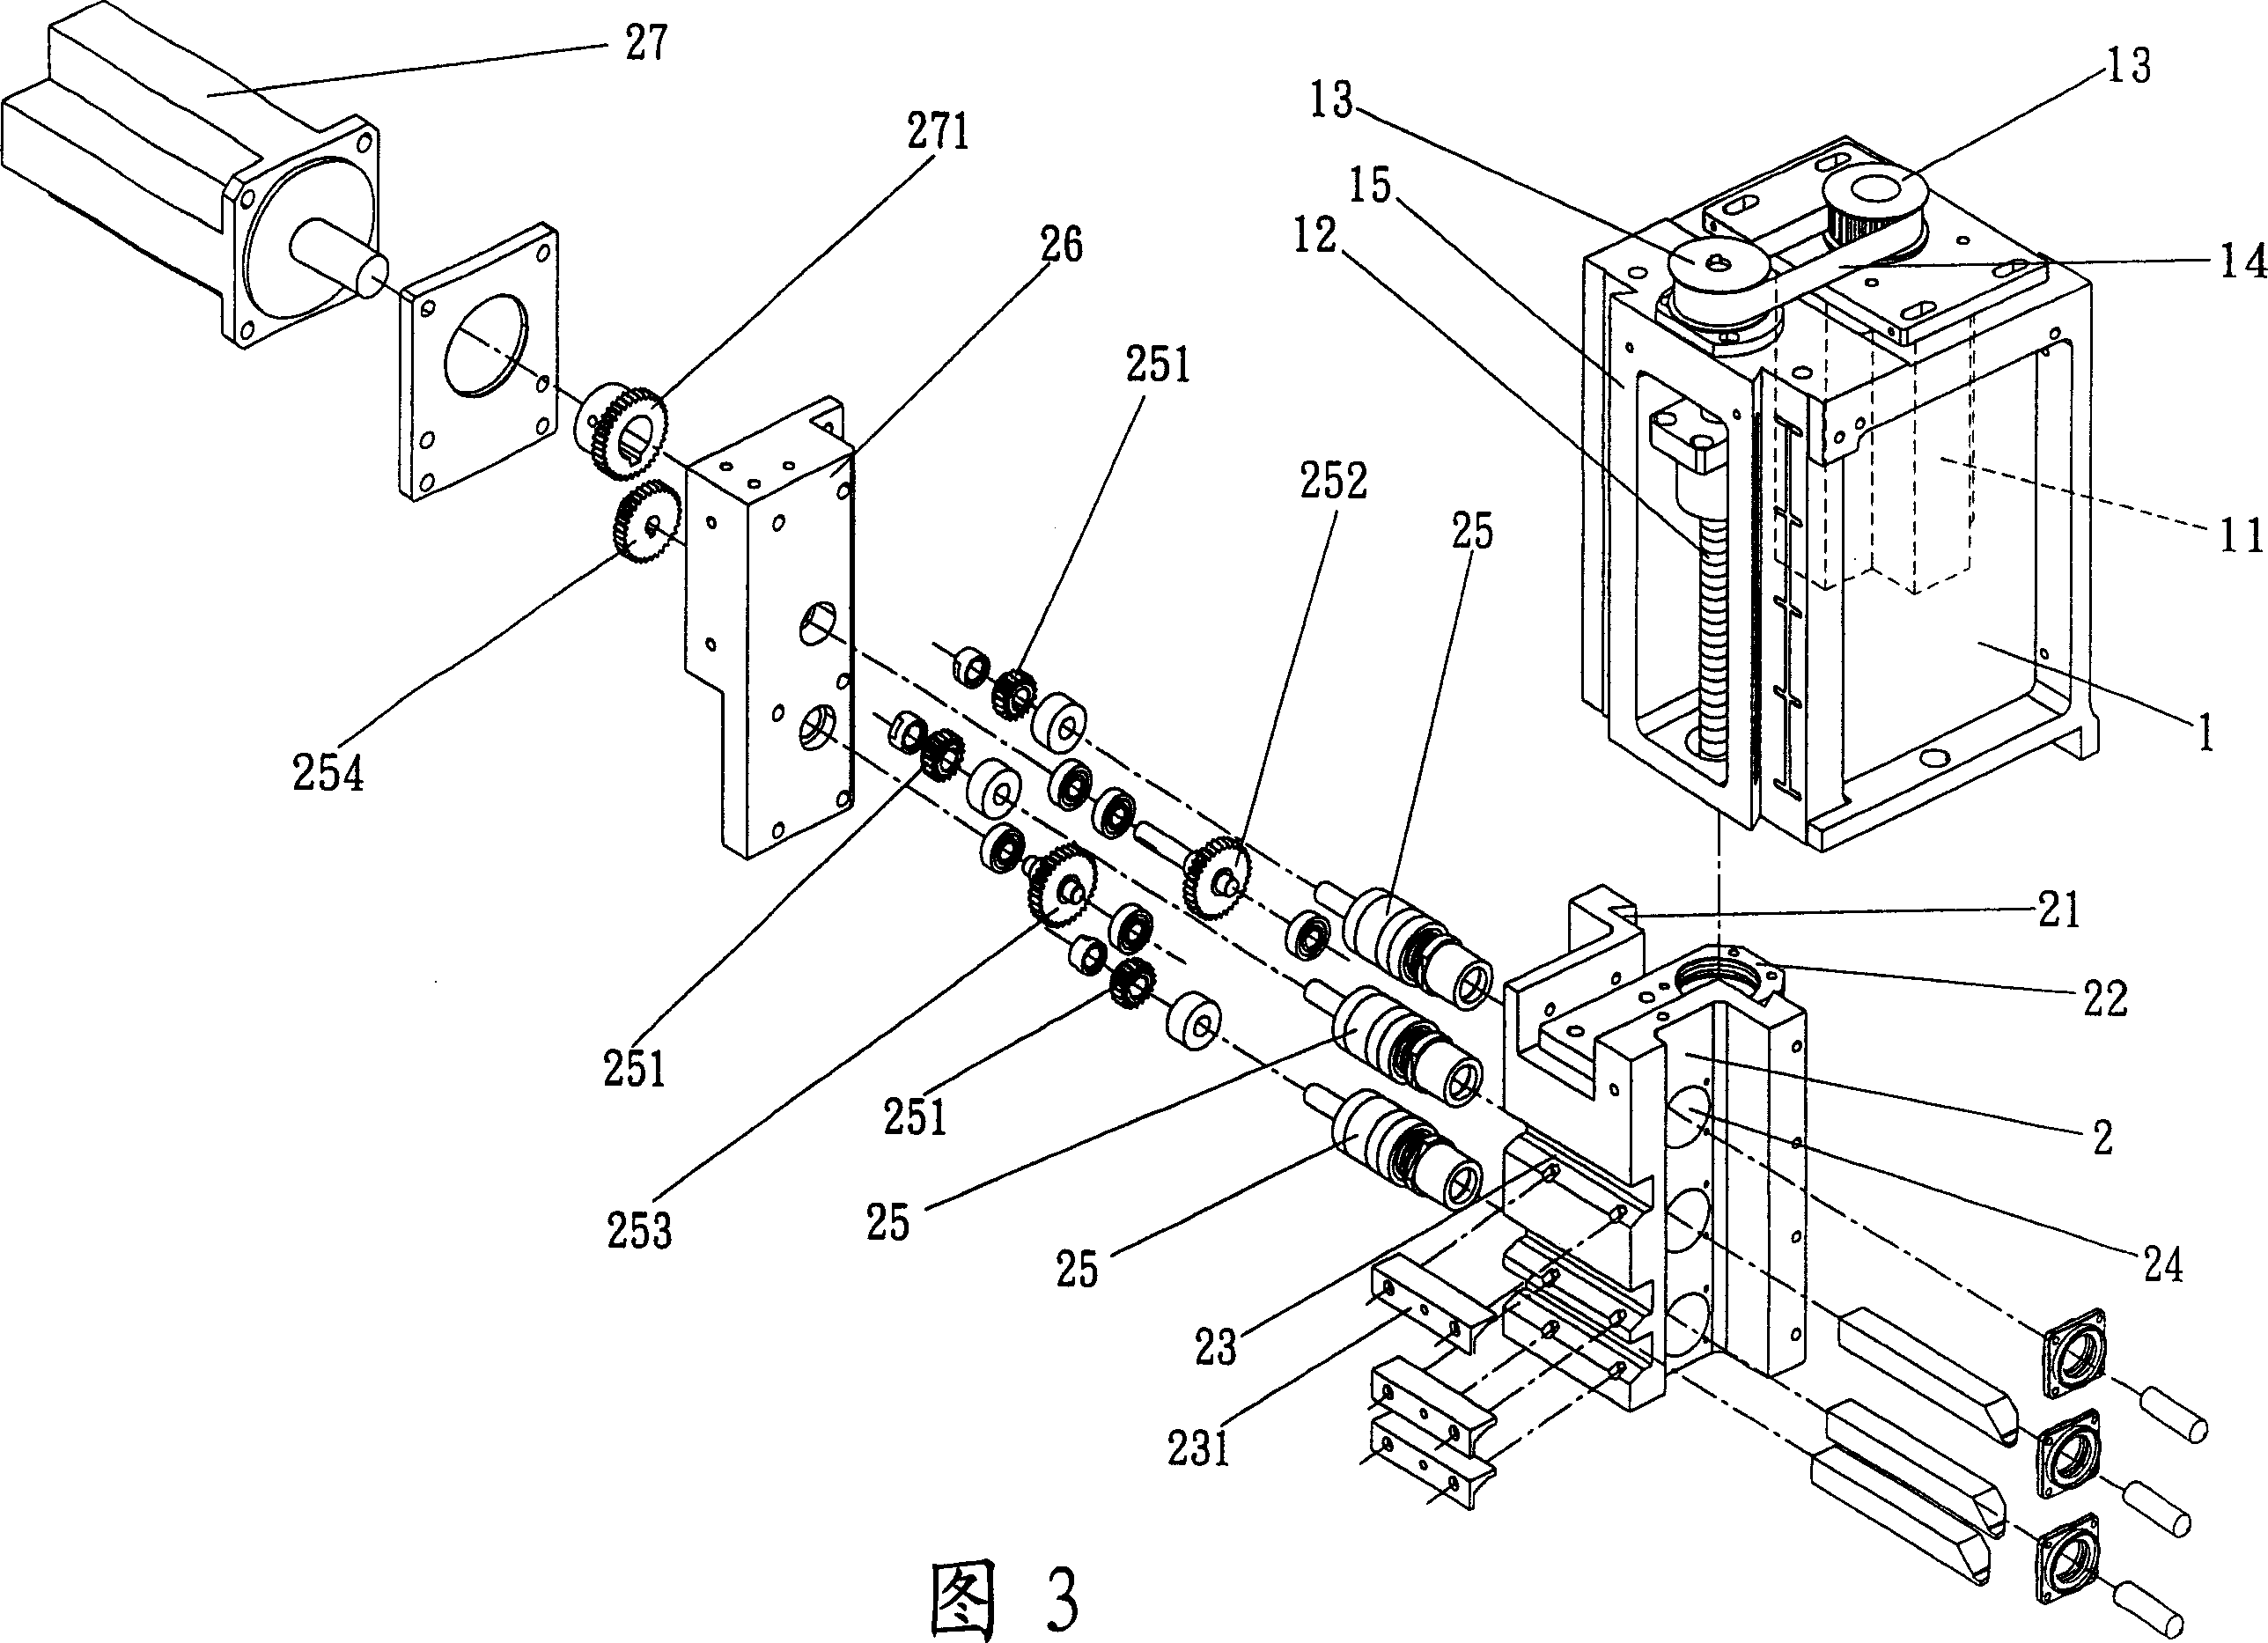 Axial-displacement cutter carriage structure of miller